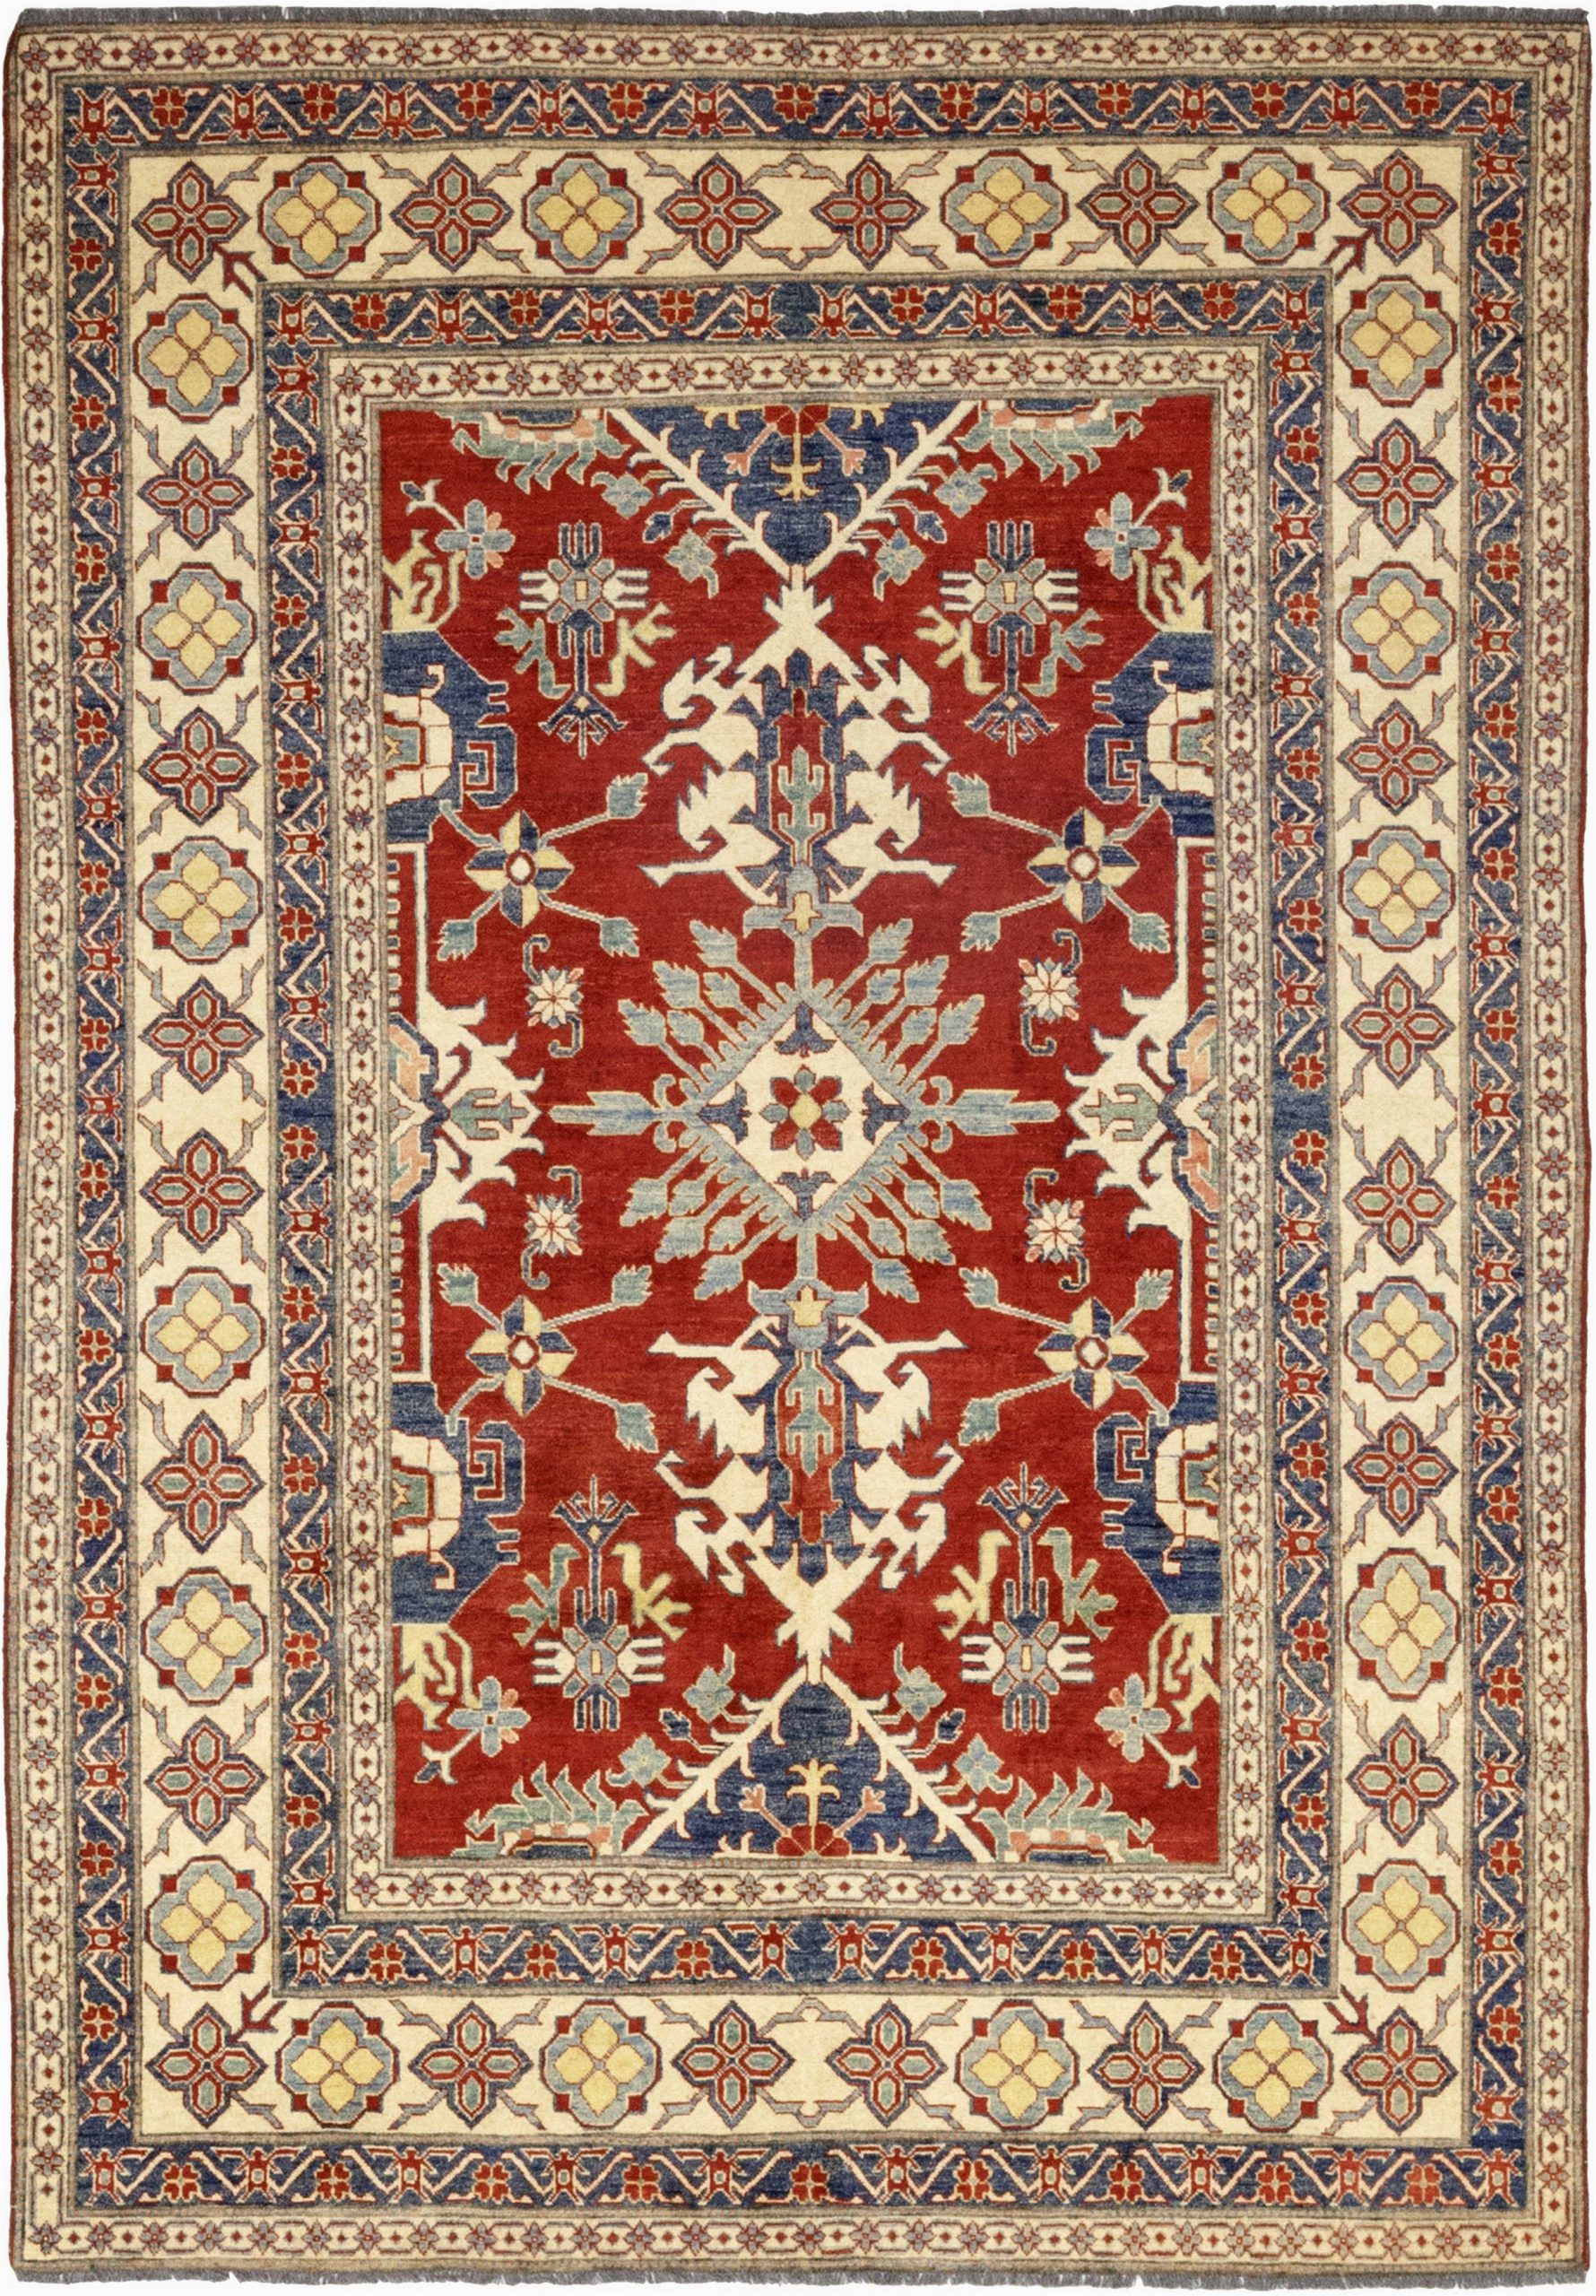 Lowes area Rugs In Store â Lowes area Rugs Clearance – Modern Rugs Popular Design